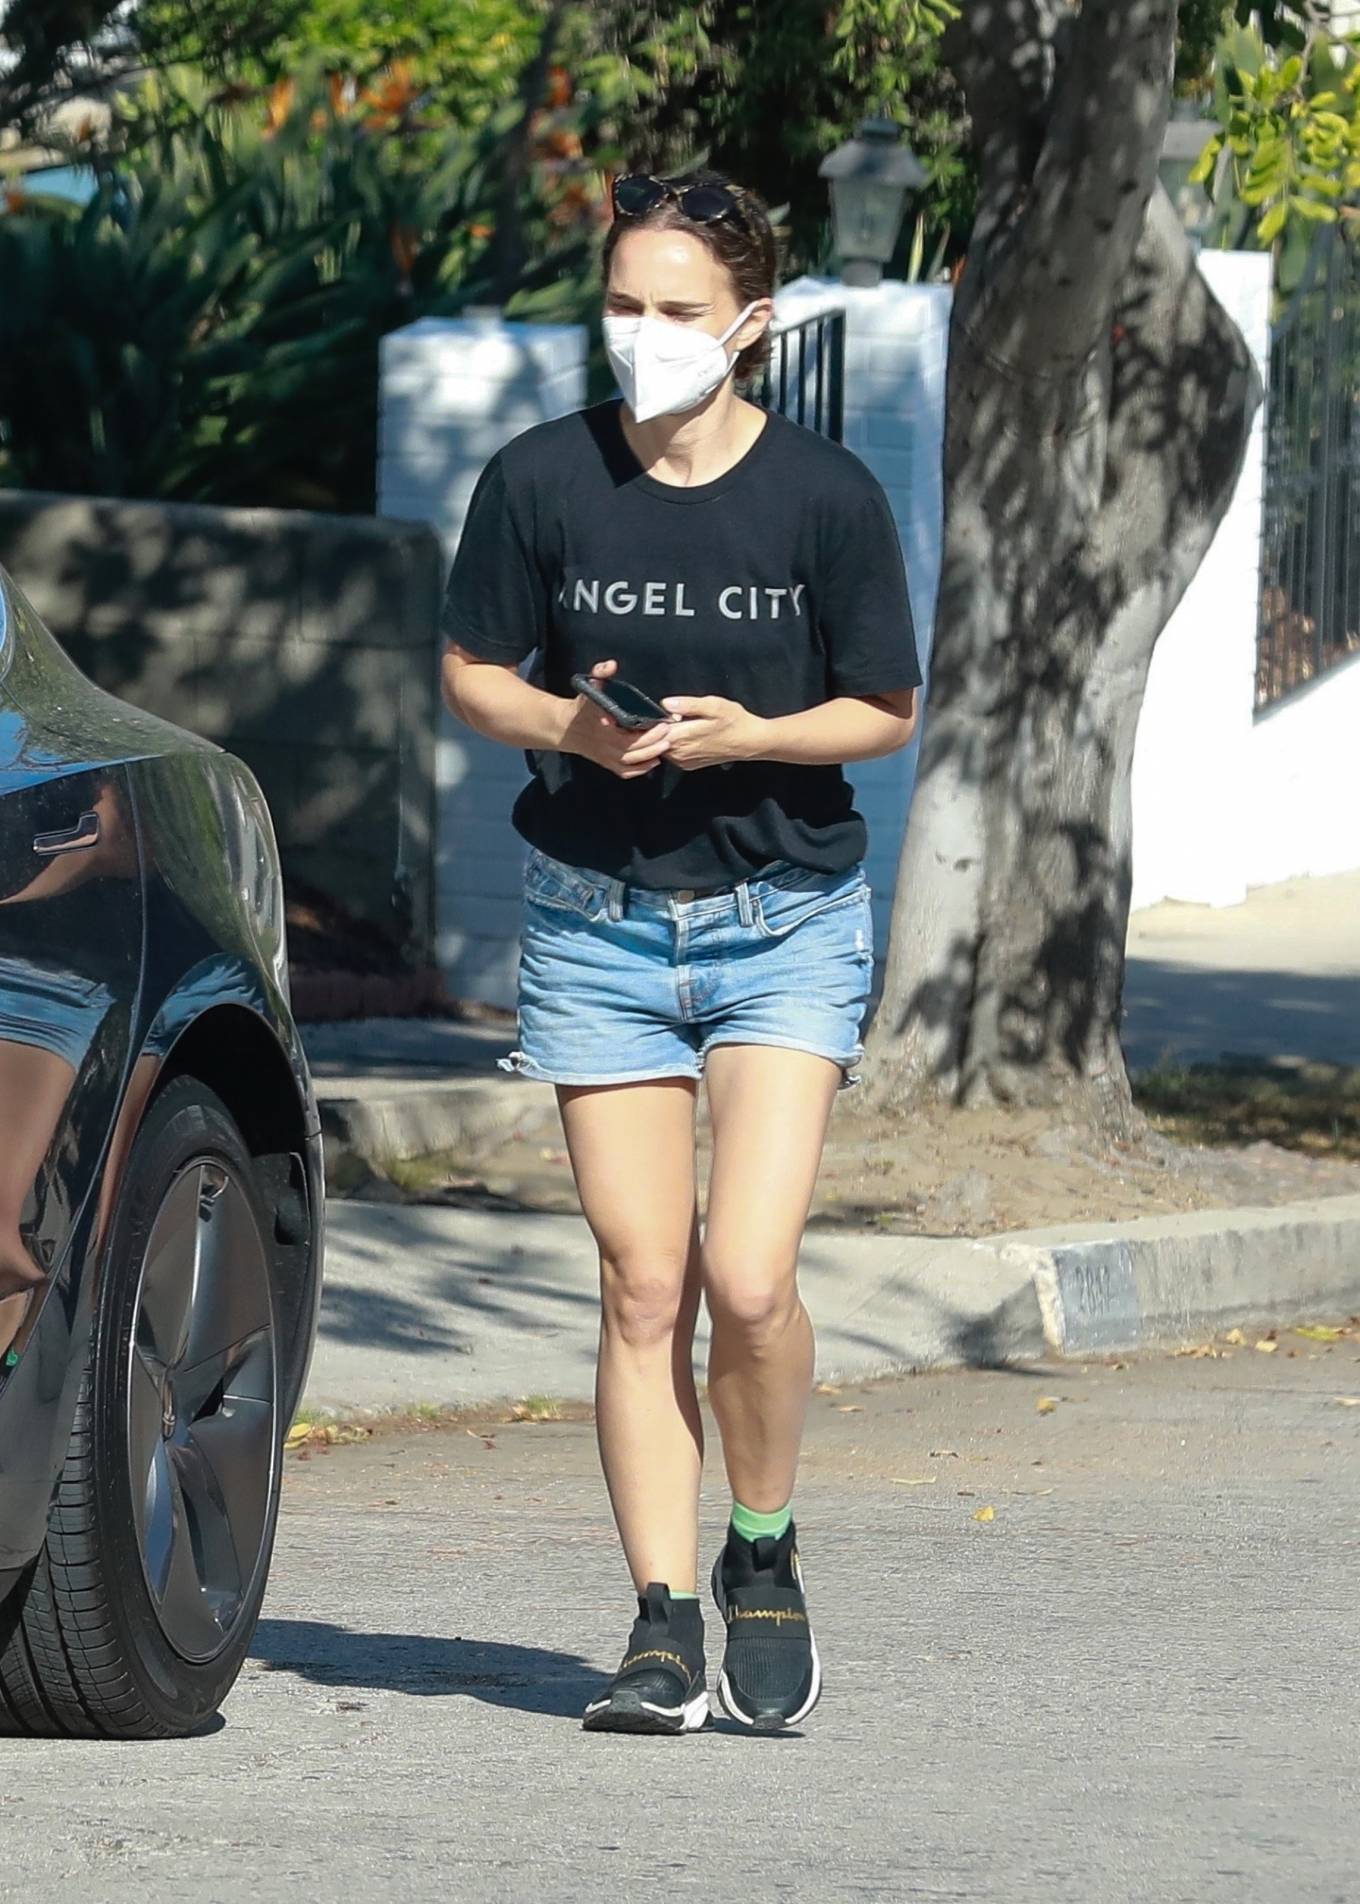 Natalie Portman - Seen after visiting a friend ahead of Emmys night in Los Angeles